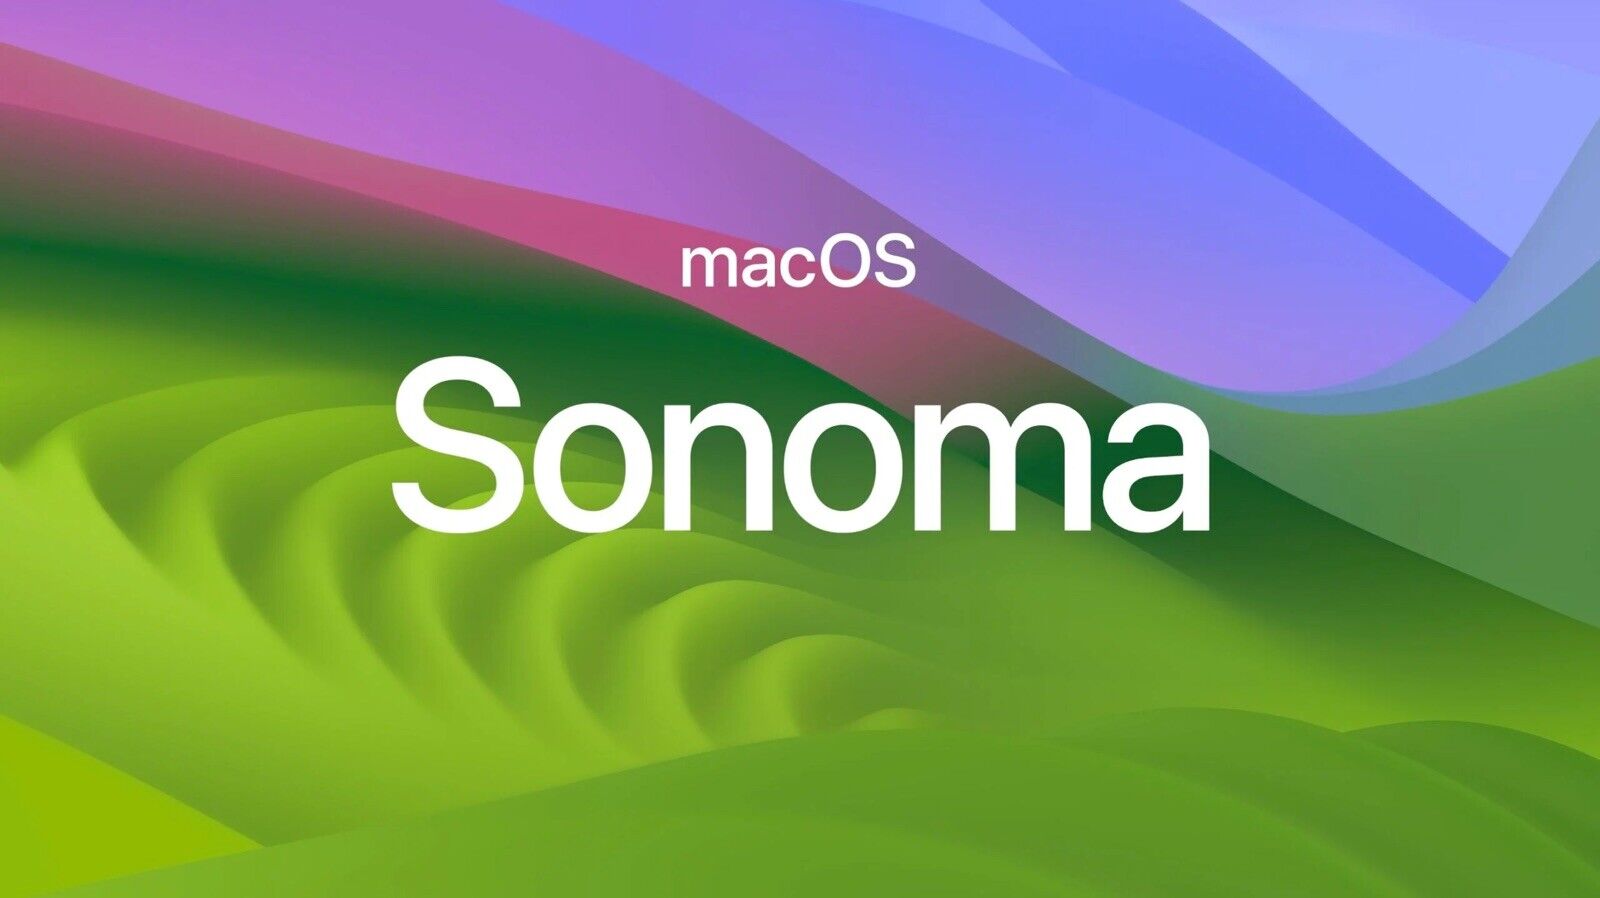 MacOS Bootable USB 2-in-1 (Sonoma/Ventura) Installer Restore/Recovery Drive